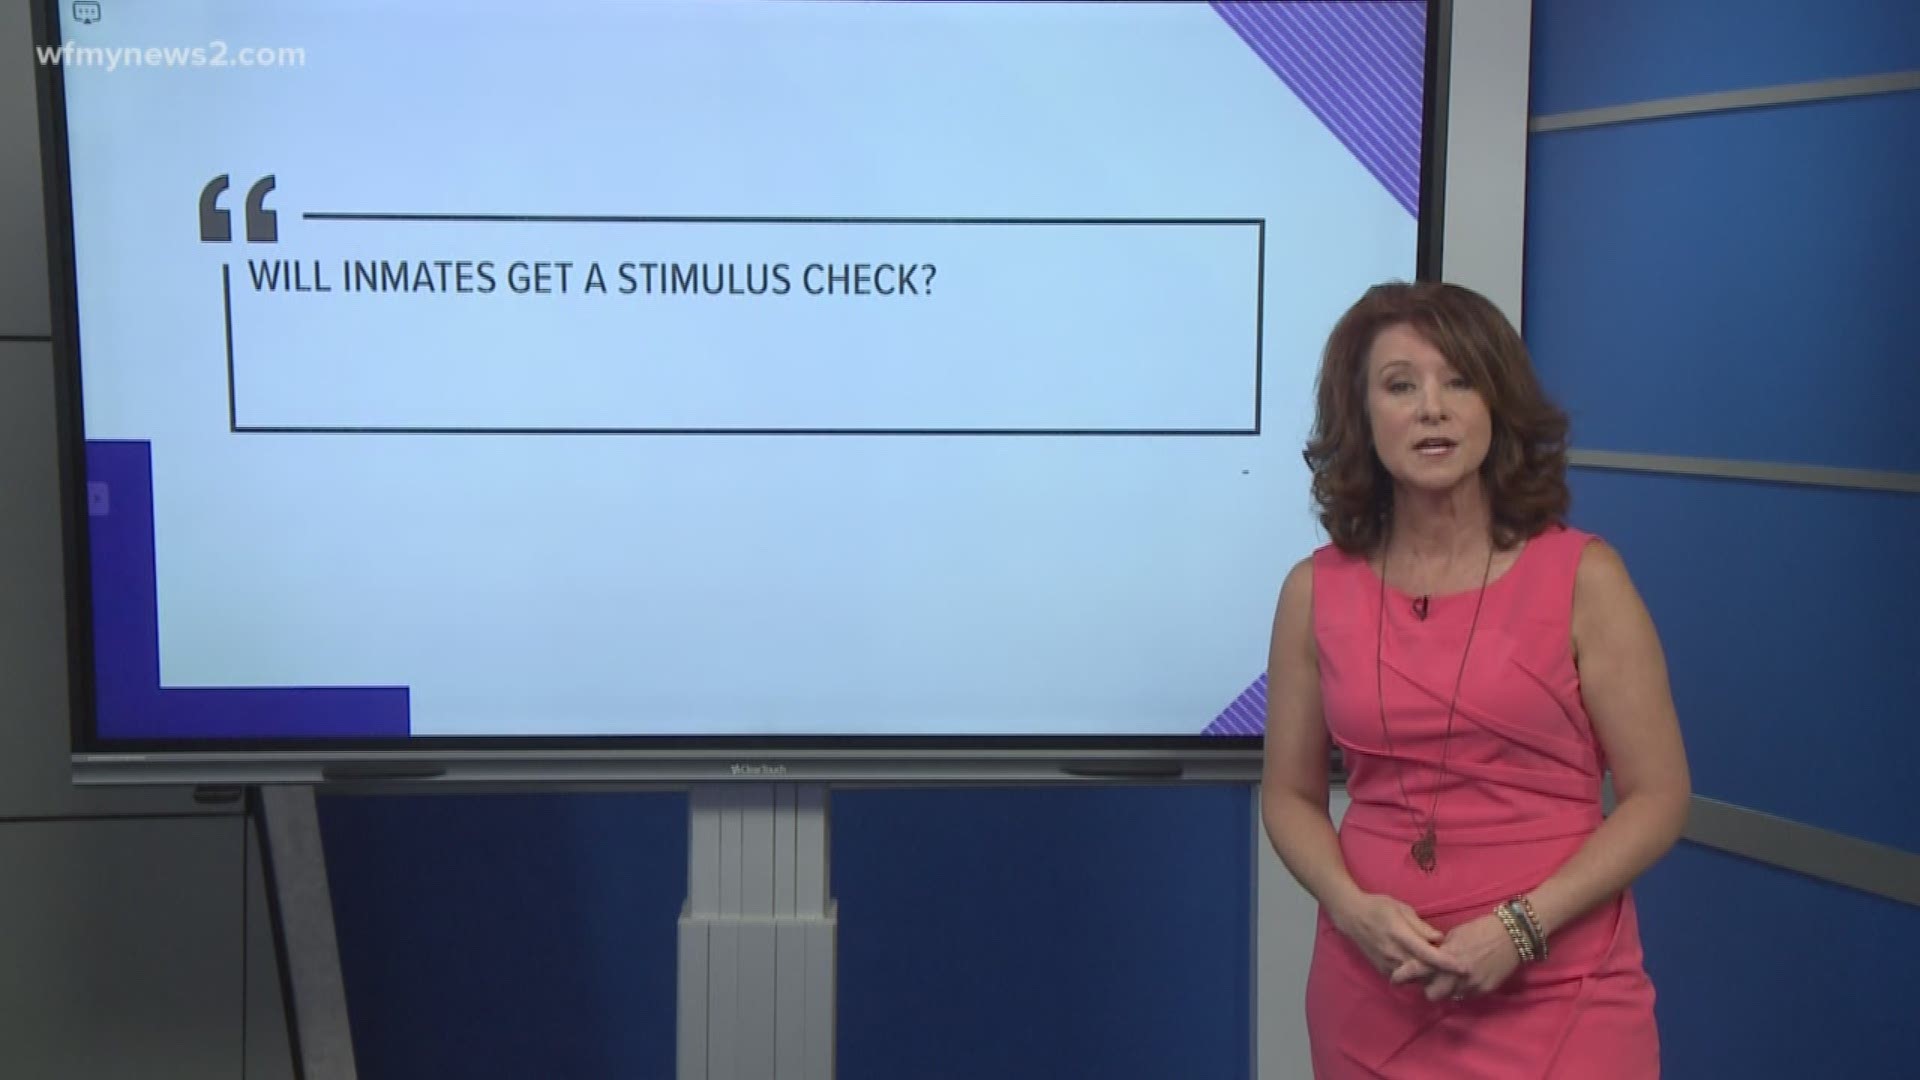 College students, people on social security, we're taking a look at who exactly gets a stimulus check.